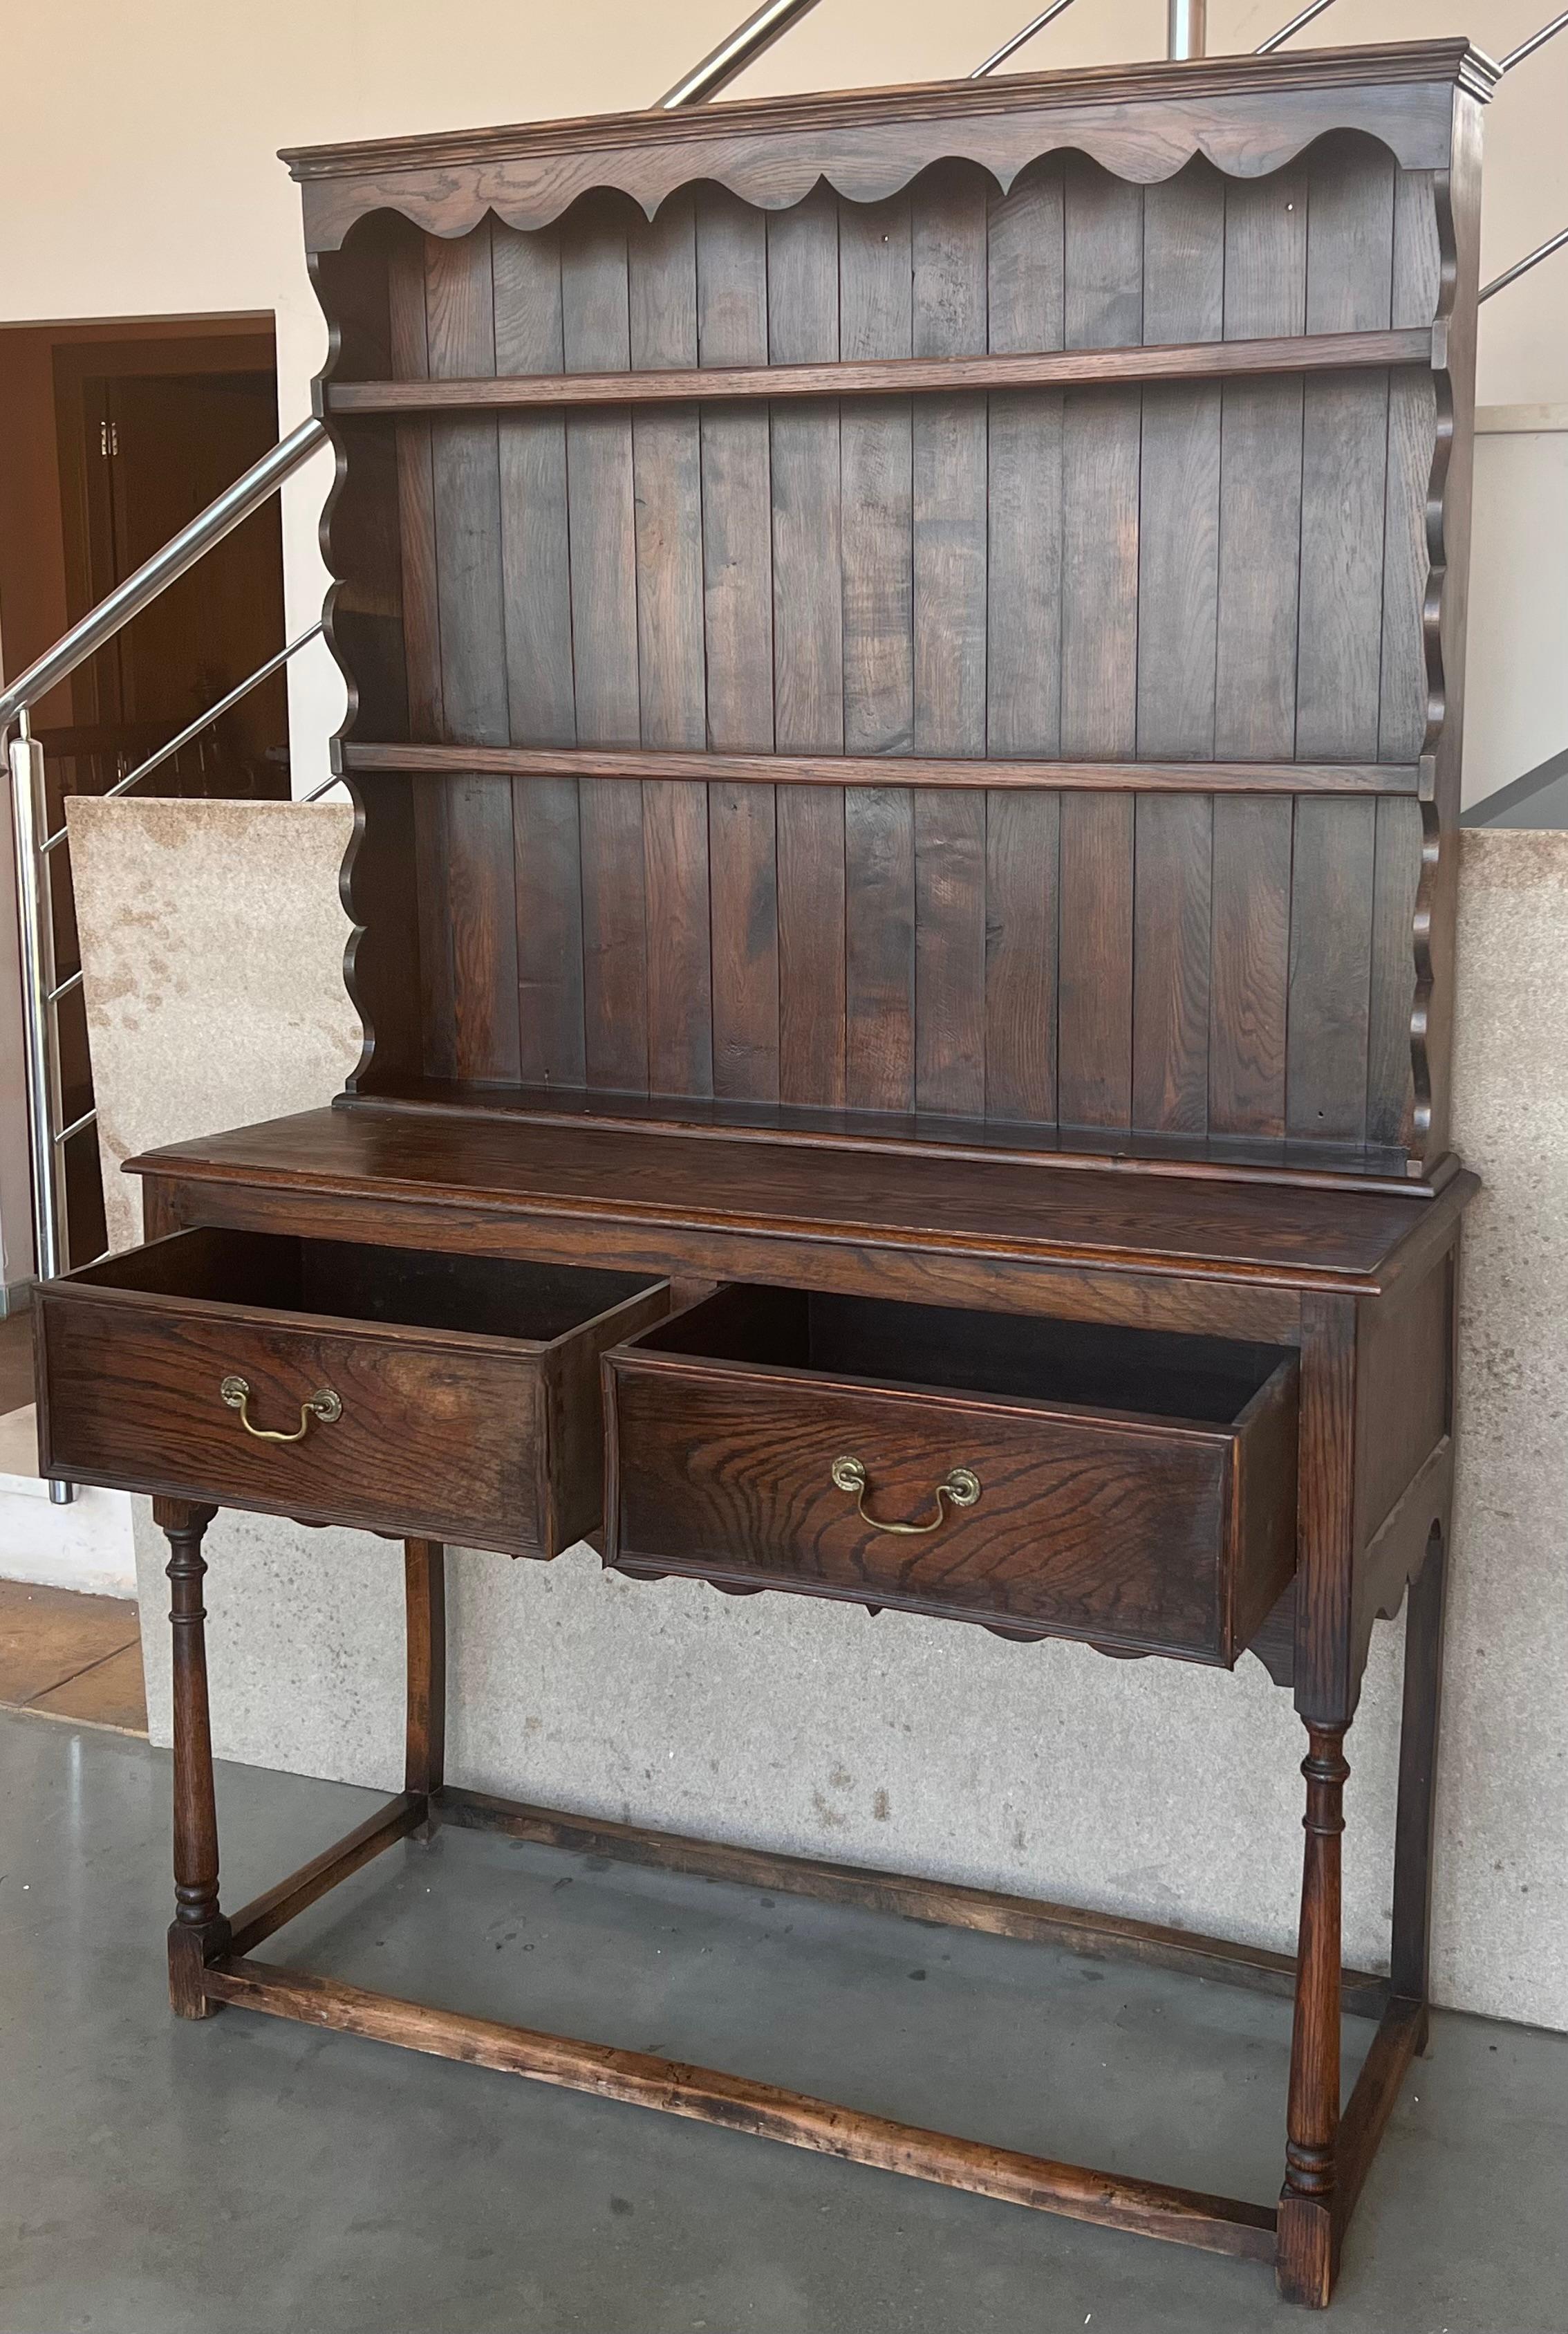 Spanish 18th Century Welsh Pot Board Dresser with two Drawers and Rack